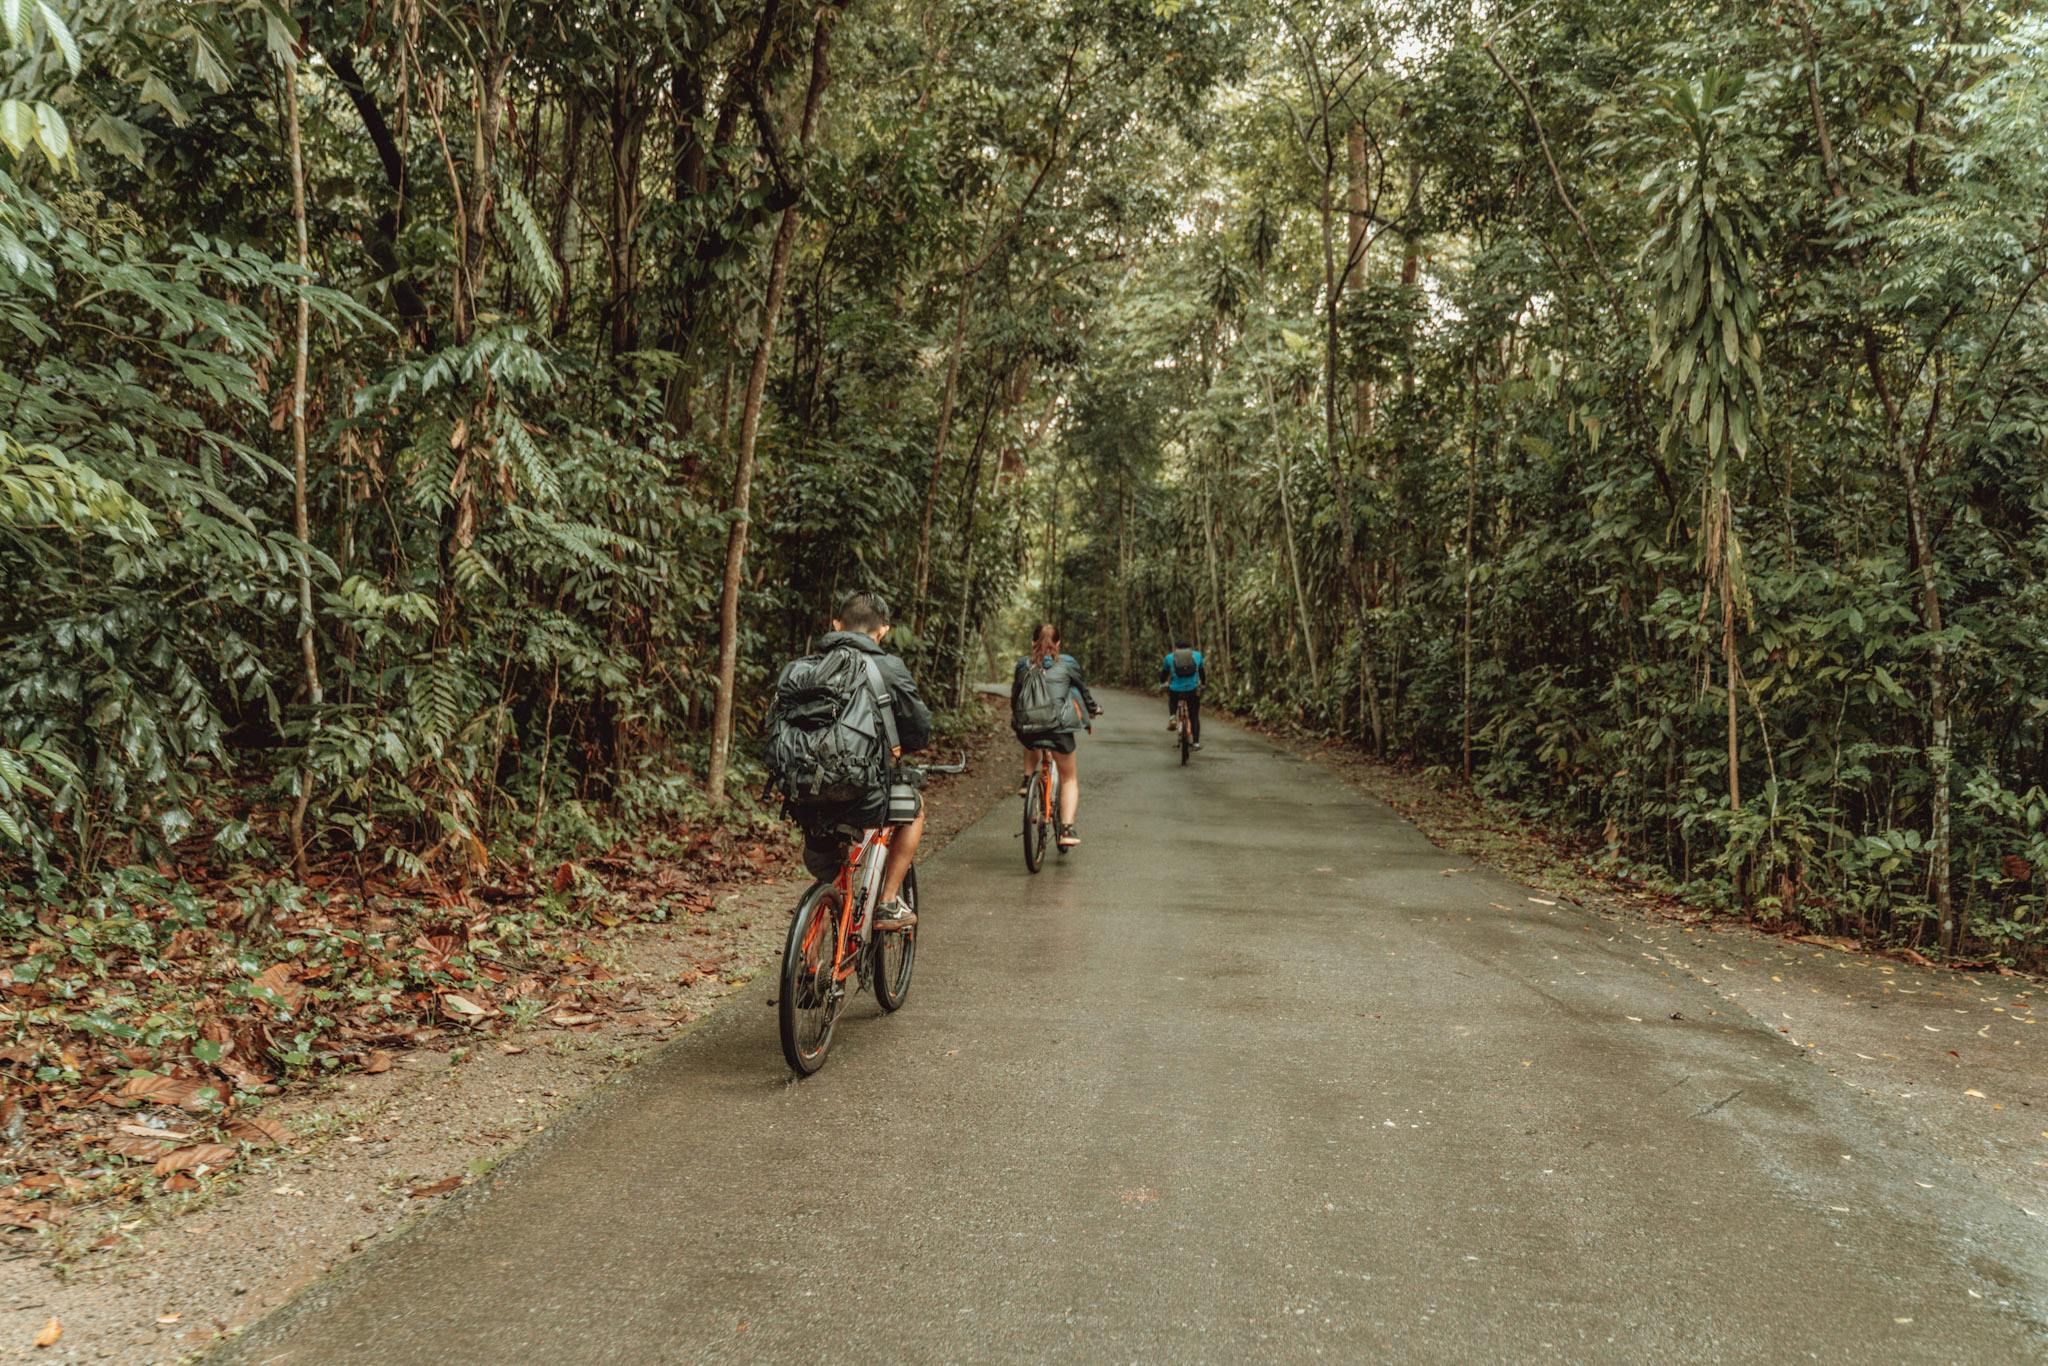 Recharge in nature with a cycling trip to Ubin, and learn about the flora and fauna